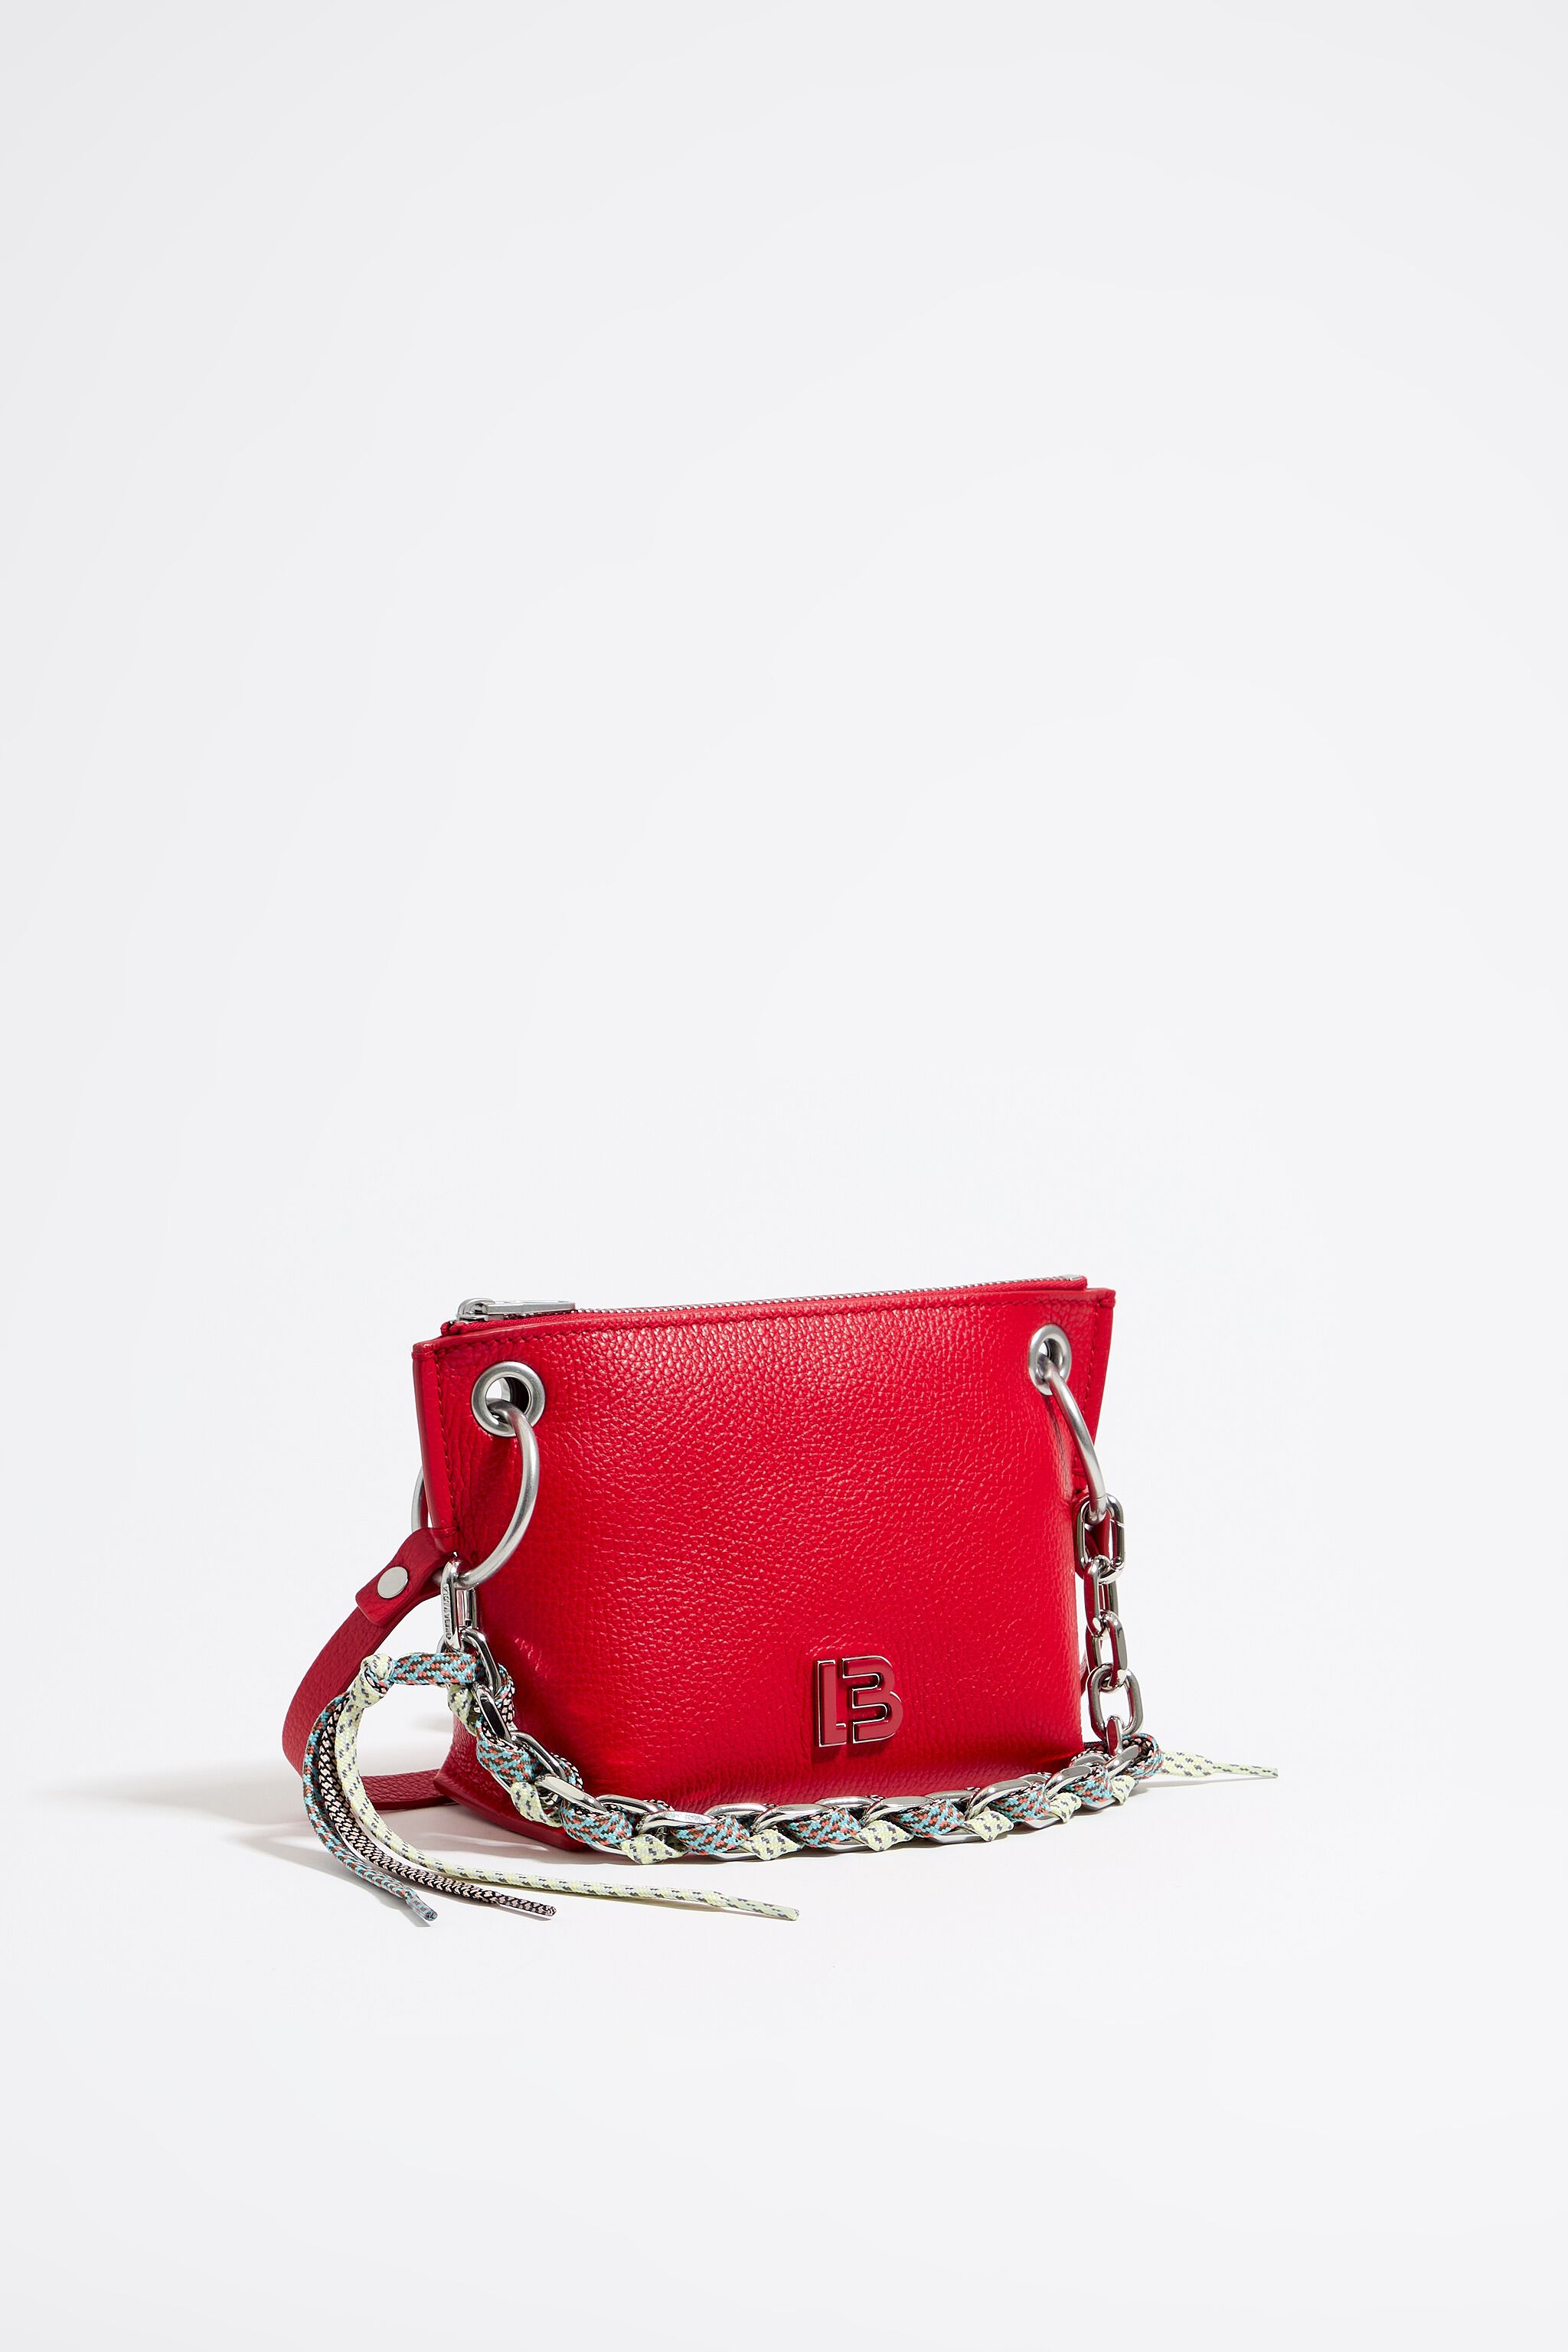 S red leather trapezium crossbody bag